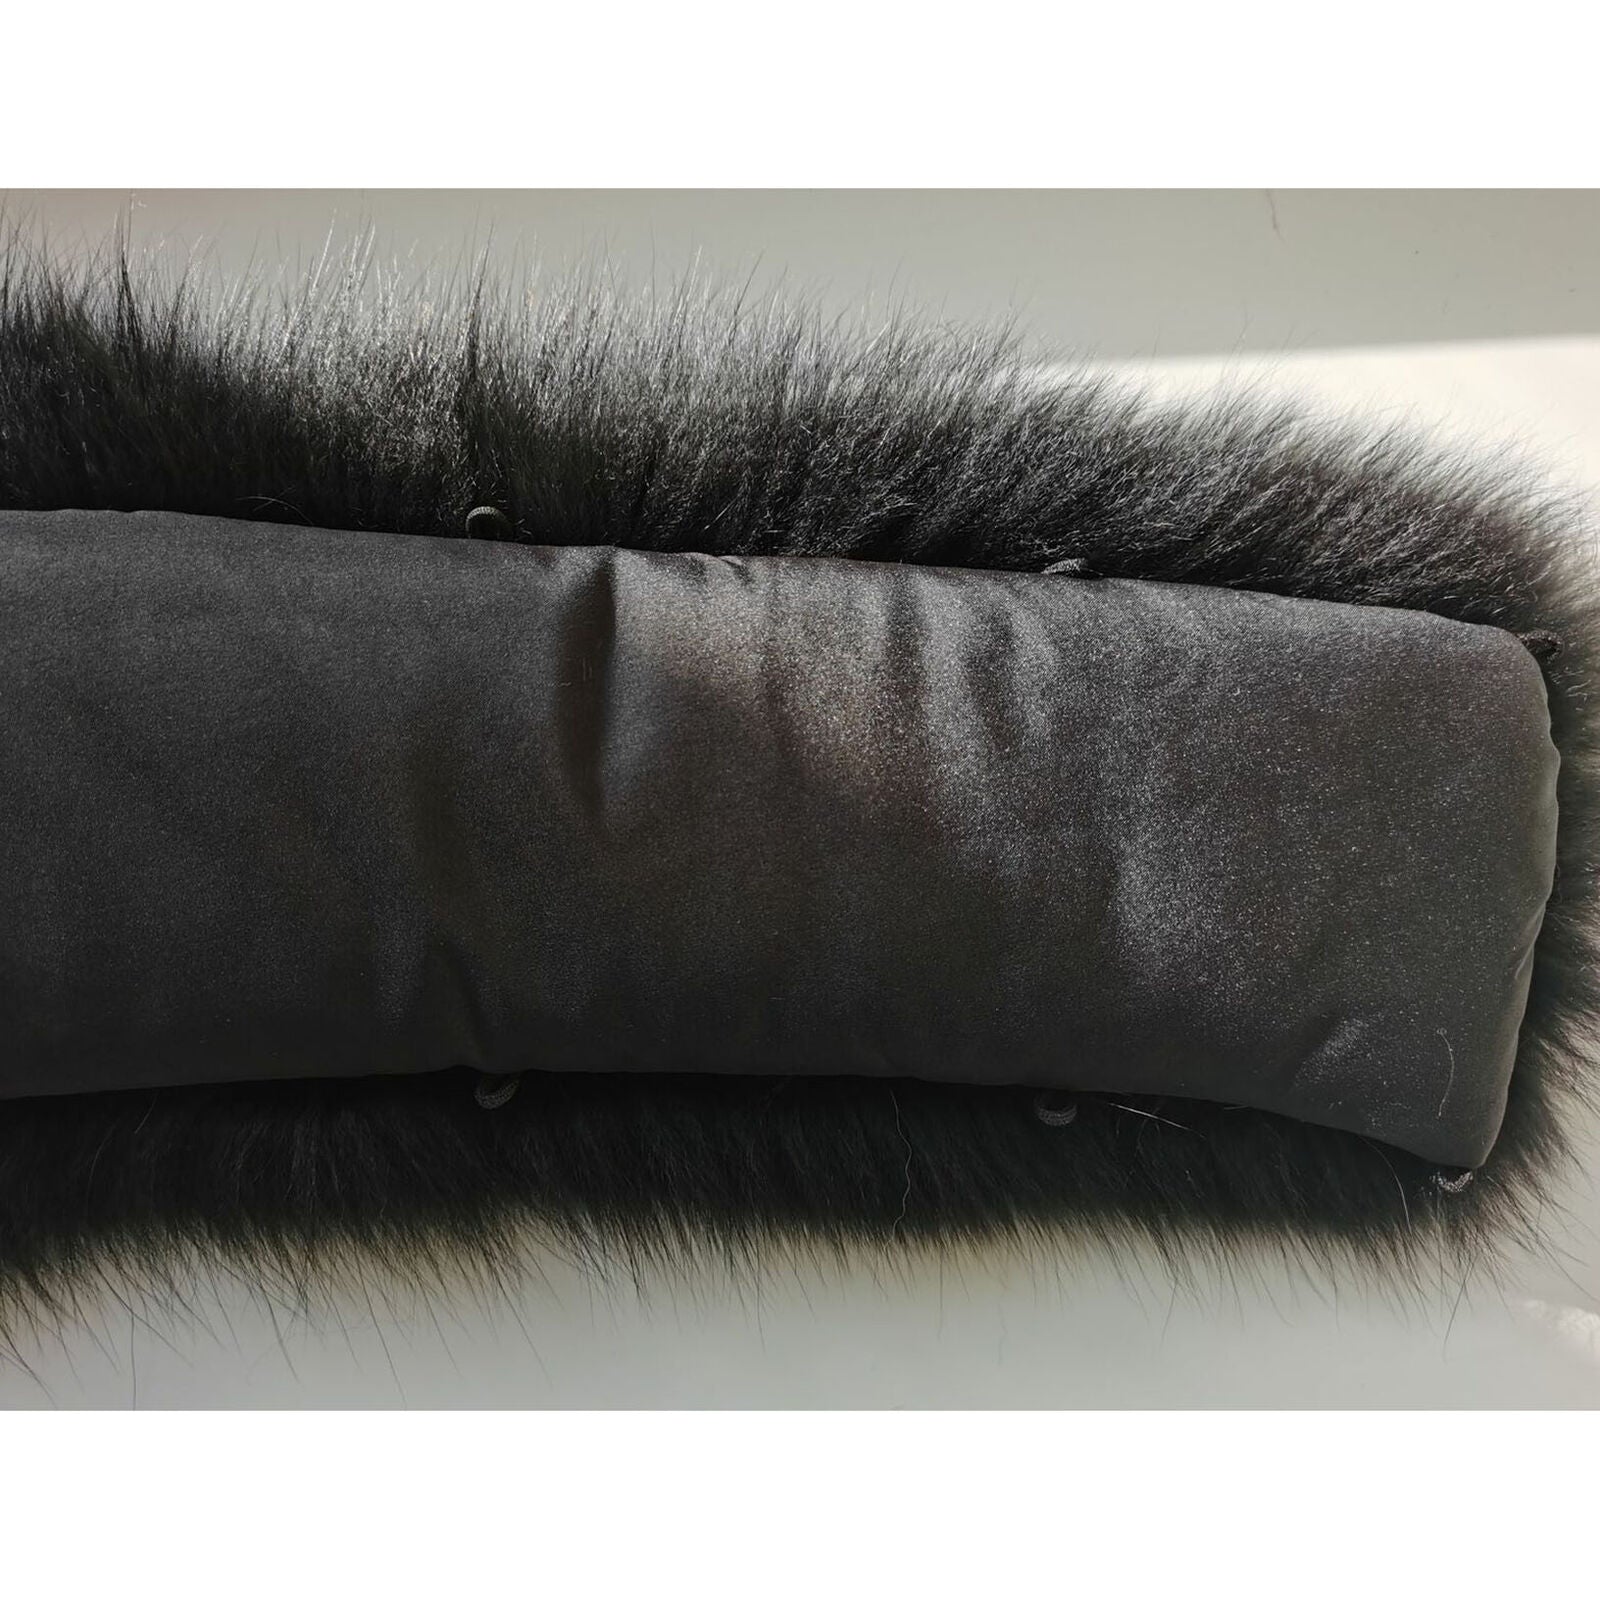 Artificial Fox Fur Collar Scarf For A Hood Down jacket and Parka Dedicated